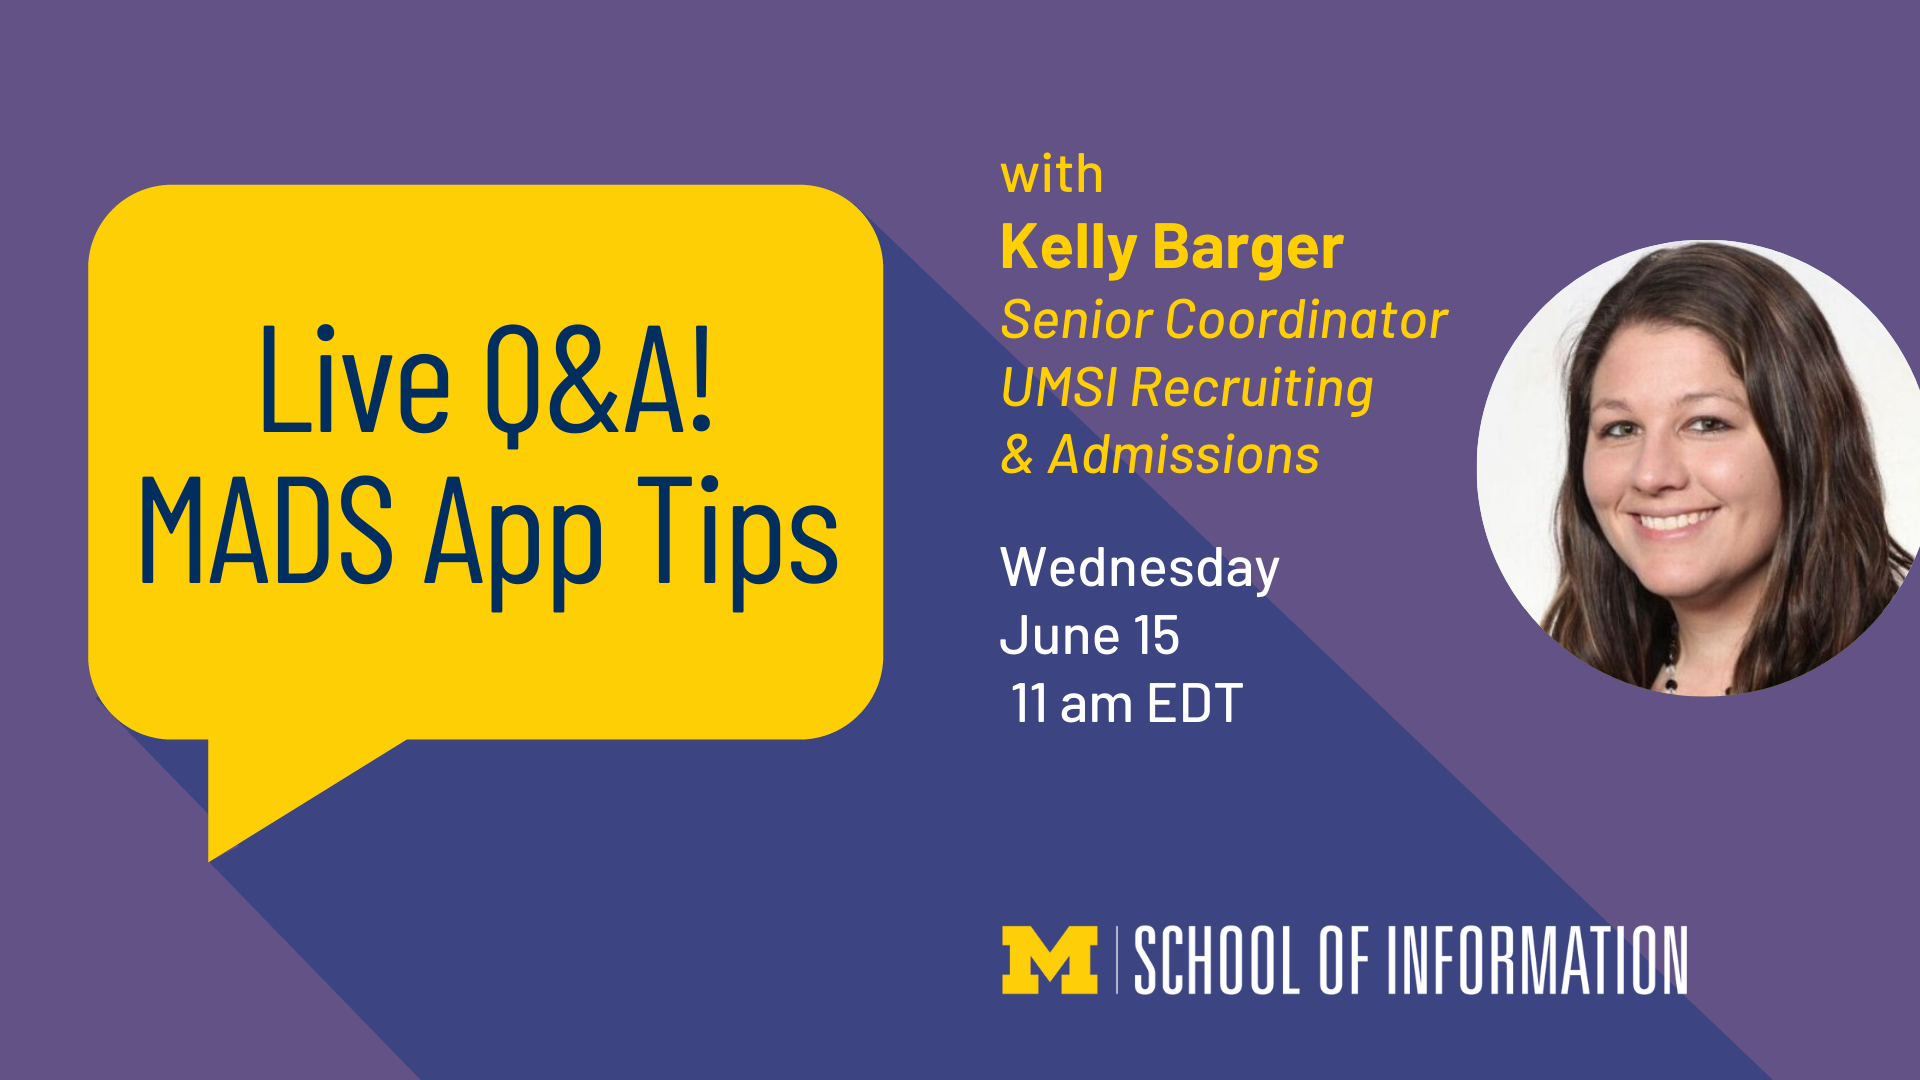 “Live Q&A! MADS App Tips with Kelly Barger. Senior Coordinator, UMSI Recruiting & Admissions. Wednesday, June 15. 11 am EDT.” 